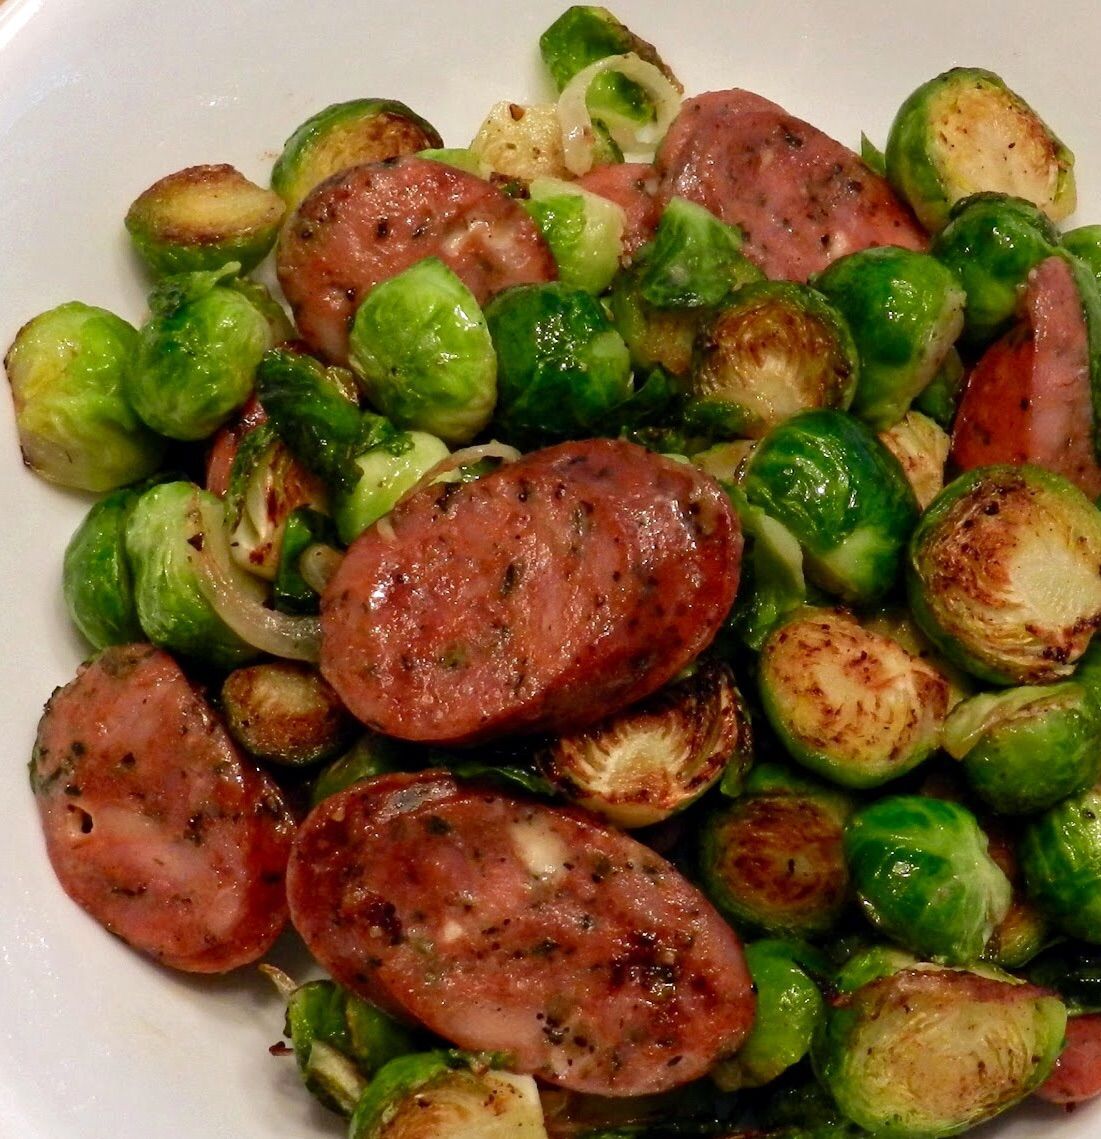 Sausage & Sprouts For Breakfast...One of the Many Hazards of Eating Low Carb & Wheat/Grain Free? -   13 south beach diet dinner
 ideas